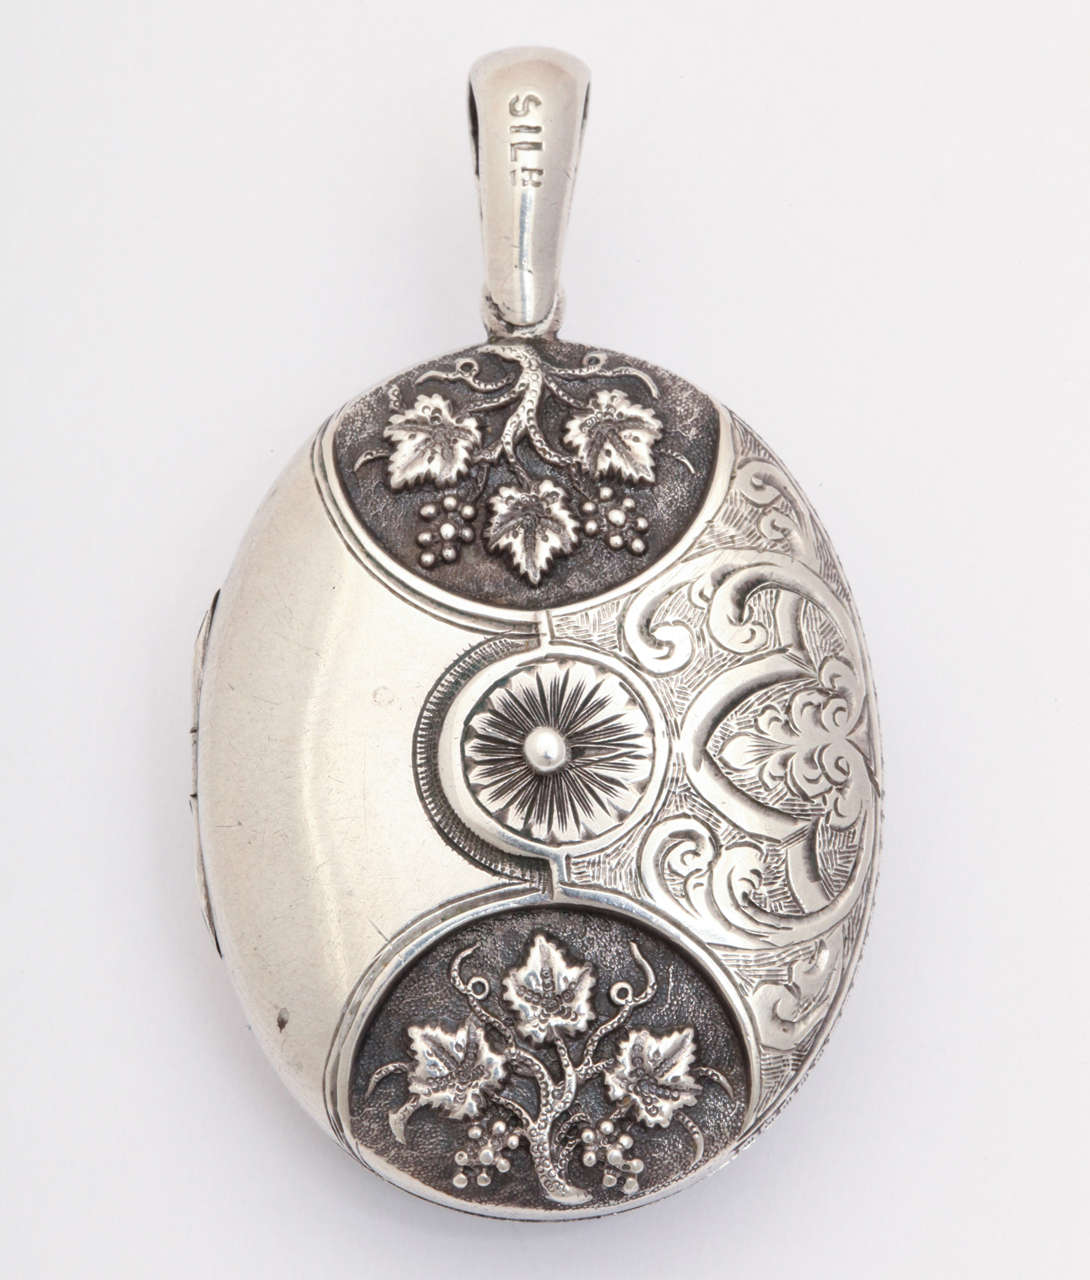 Handsomely engraved on both its sides, this English silver locket is a model of the fine silver work created in the late 19th century in the United Kingdom.  Jewelry at that time reflected the nature, whimsy, sentimentality and symbolism. One side